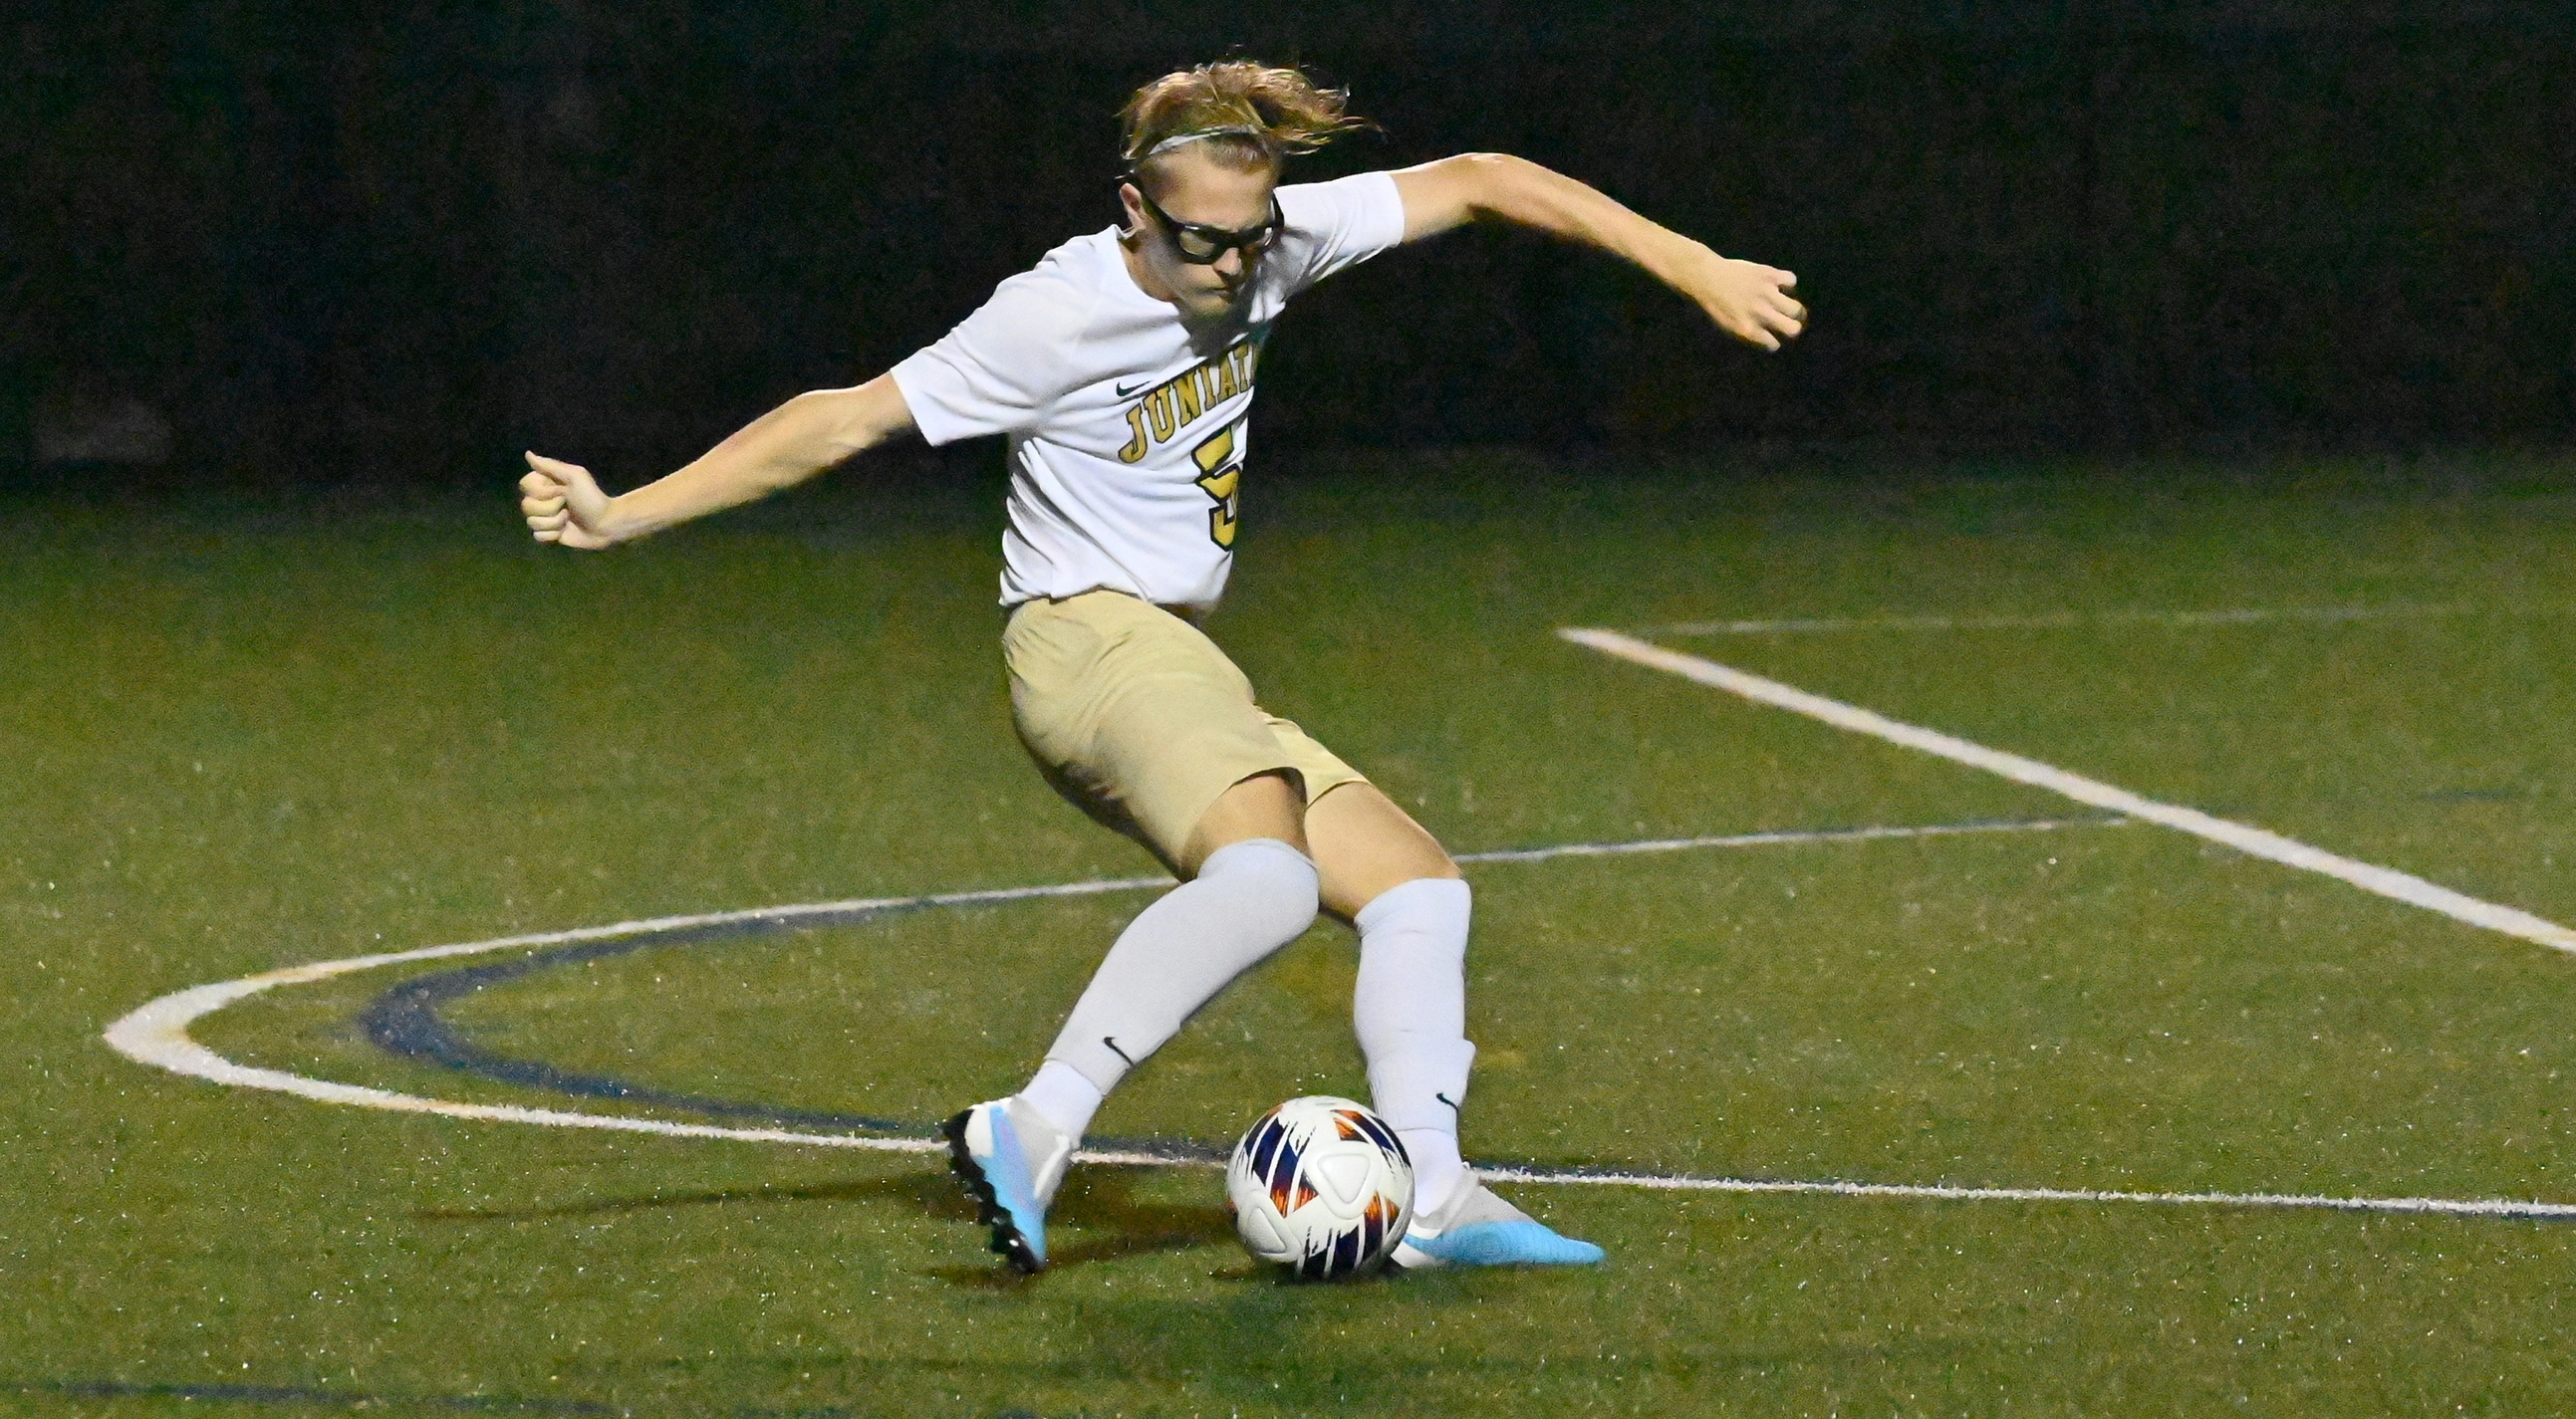 Weick's Brace Sparks Eagles Comeback Win Over Cougars